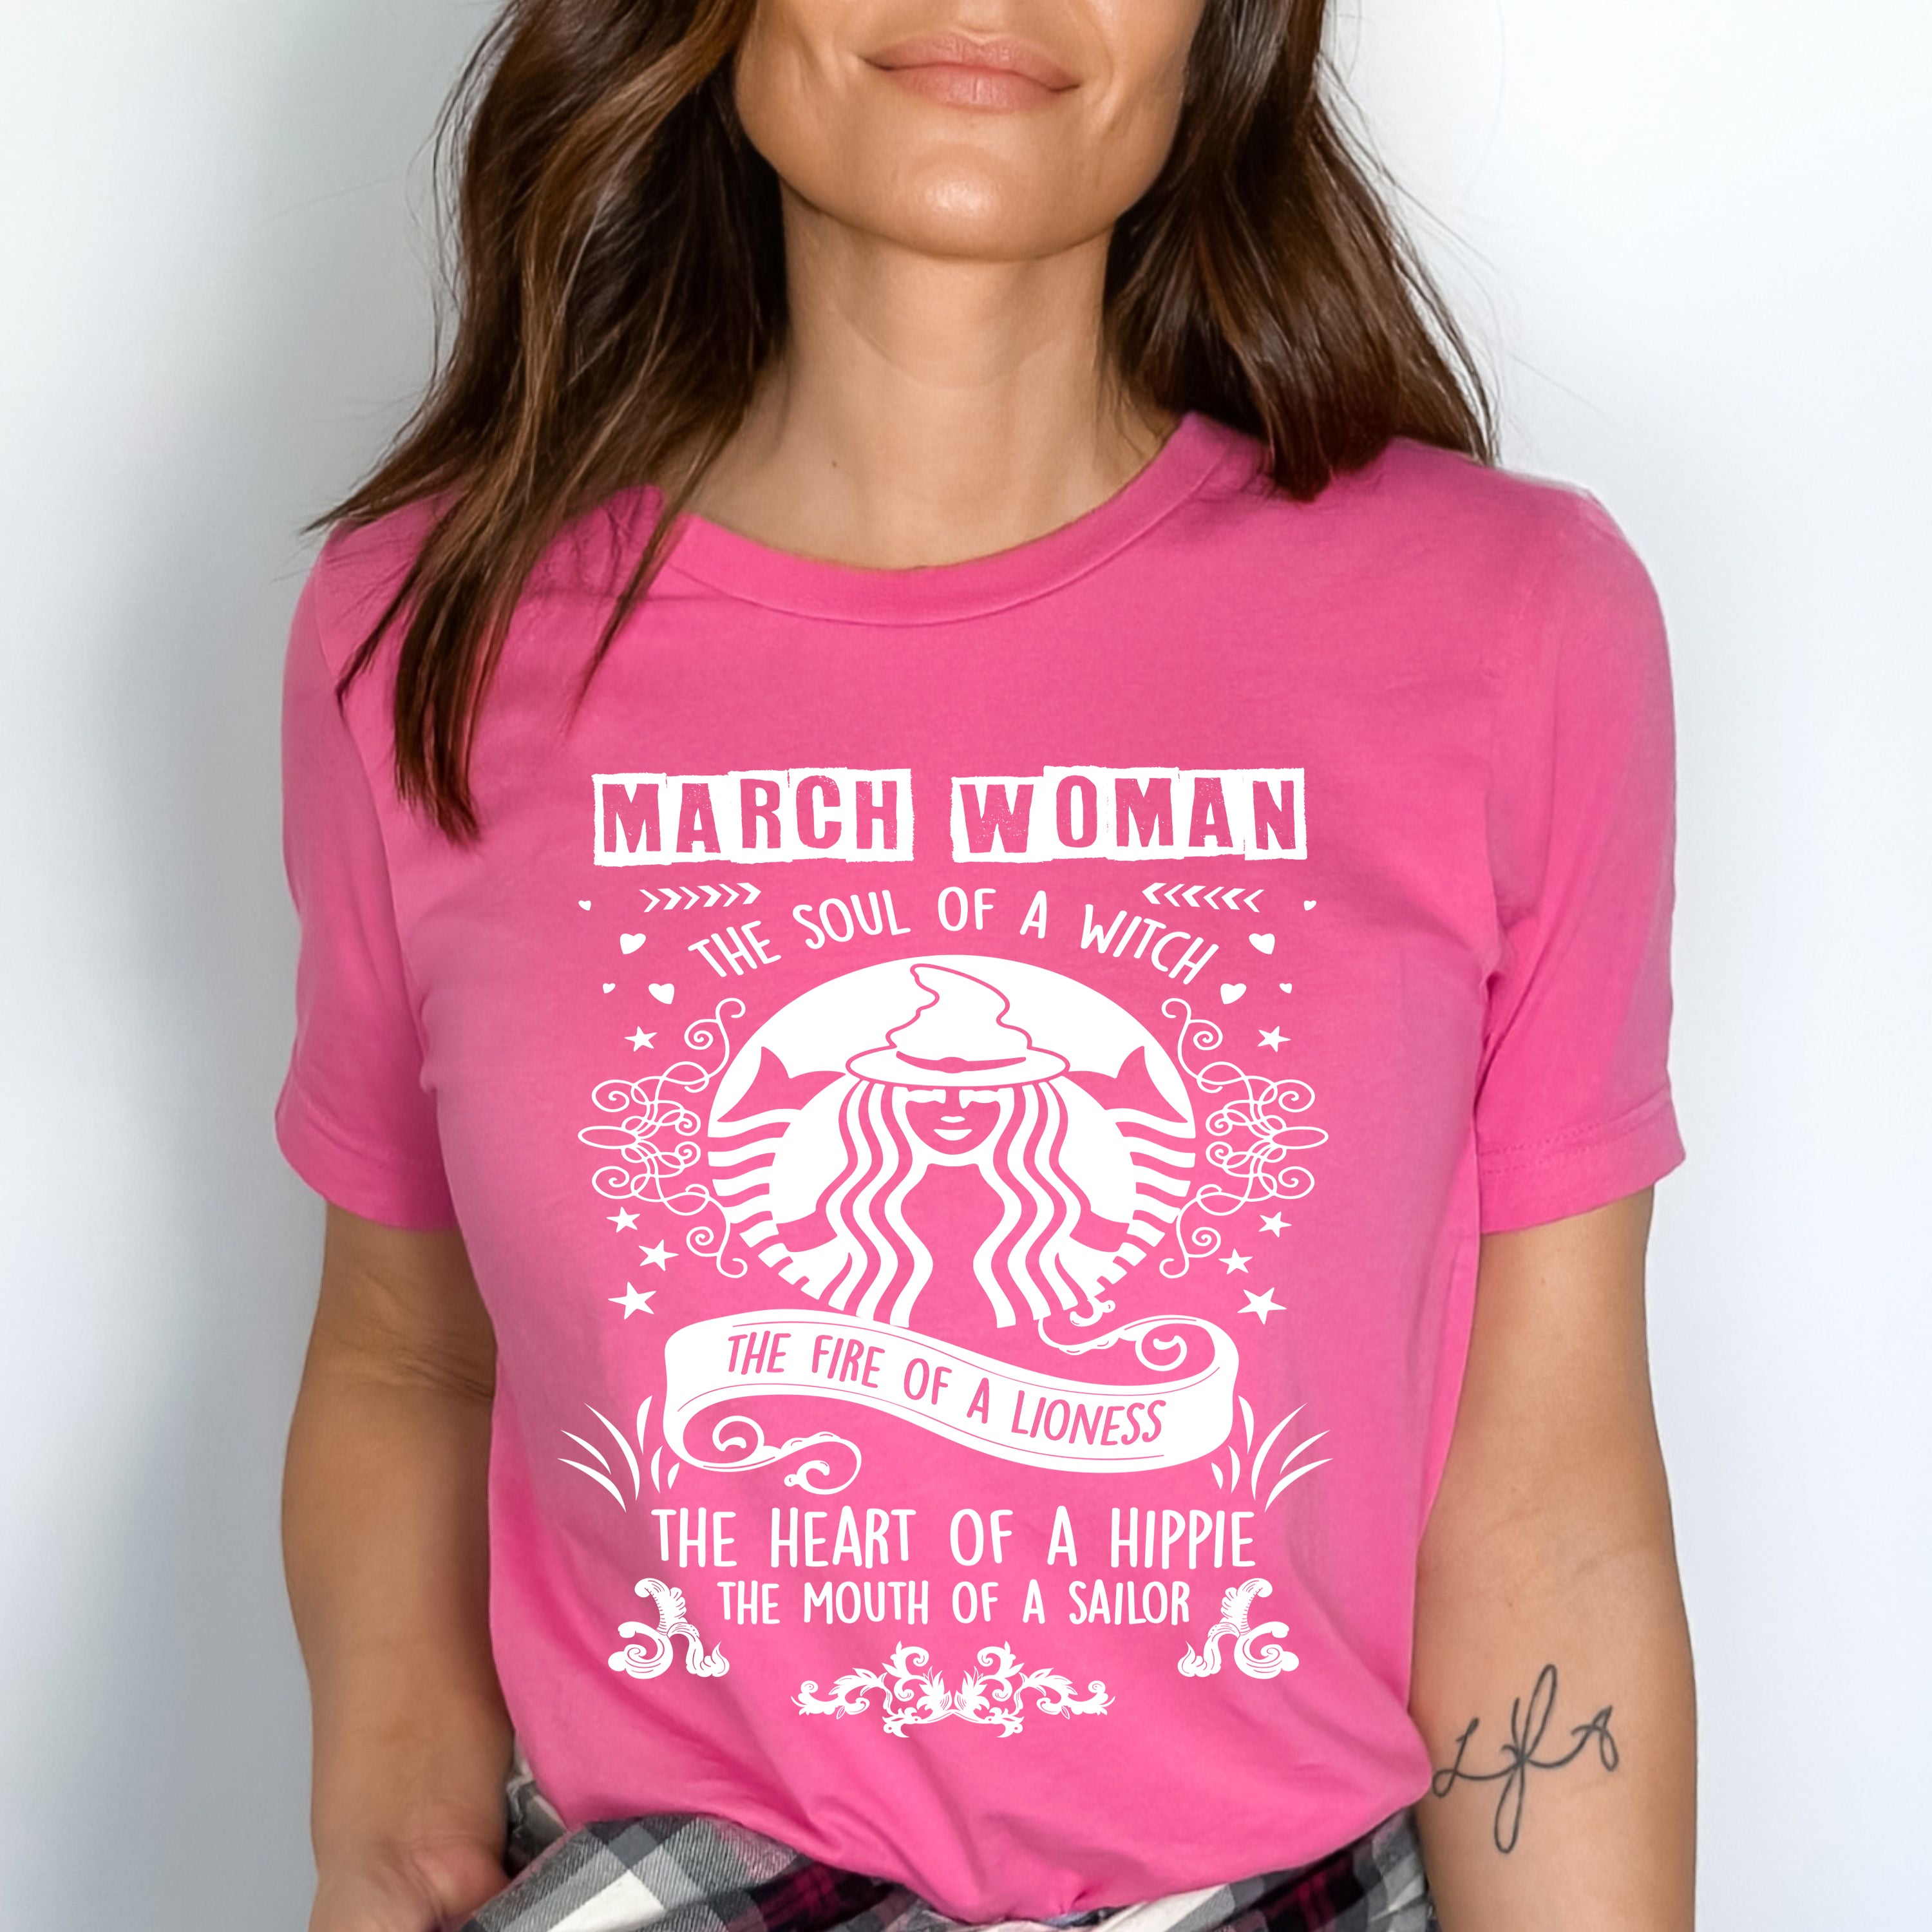 "MARCH WOMAN The Soul Of A Witch The Fire Of A Lioness The Heart Of A Hippie...",T-Shirt.